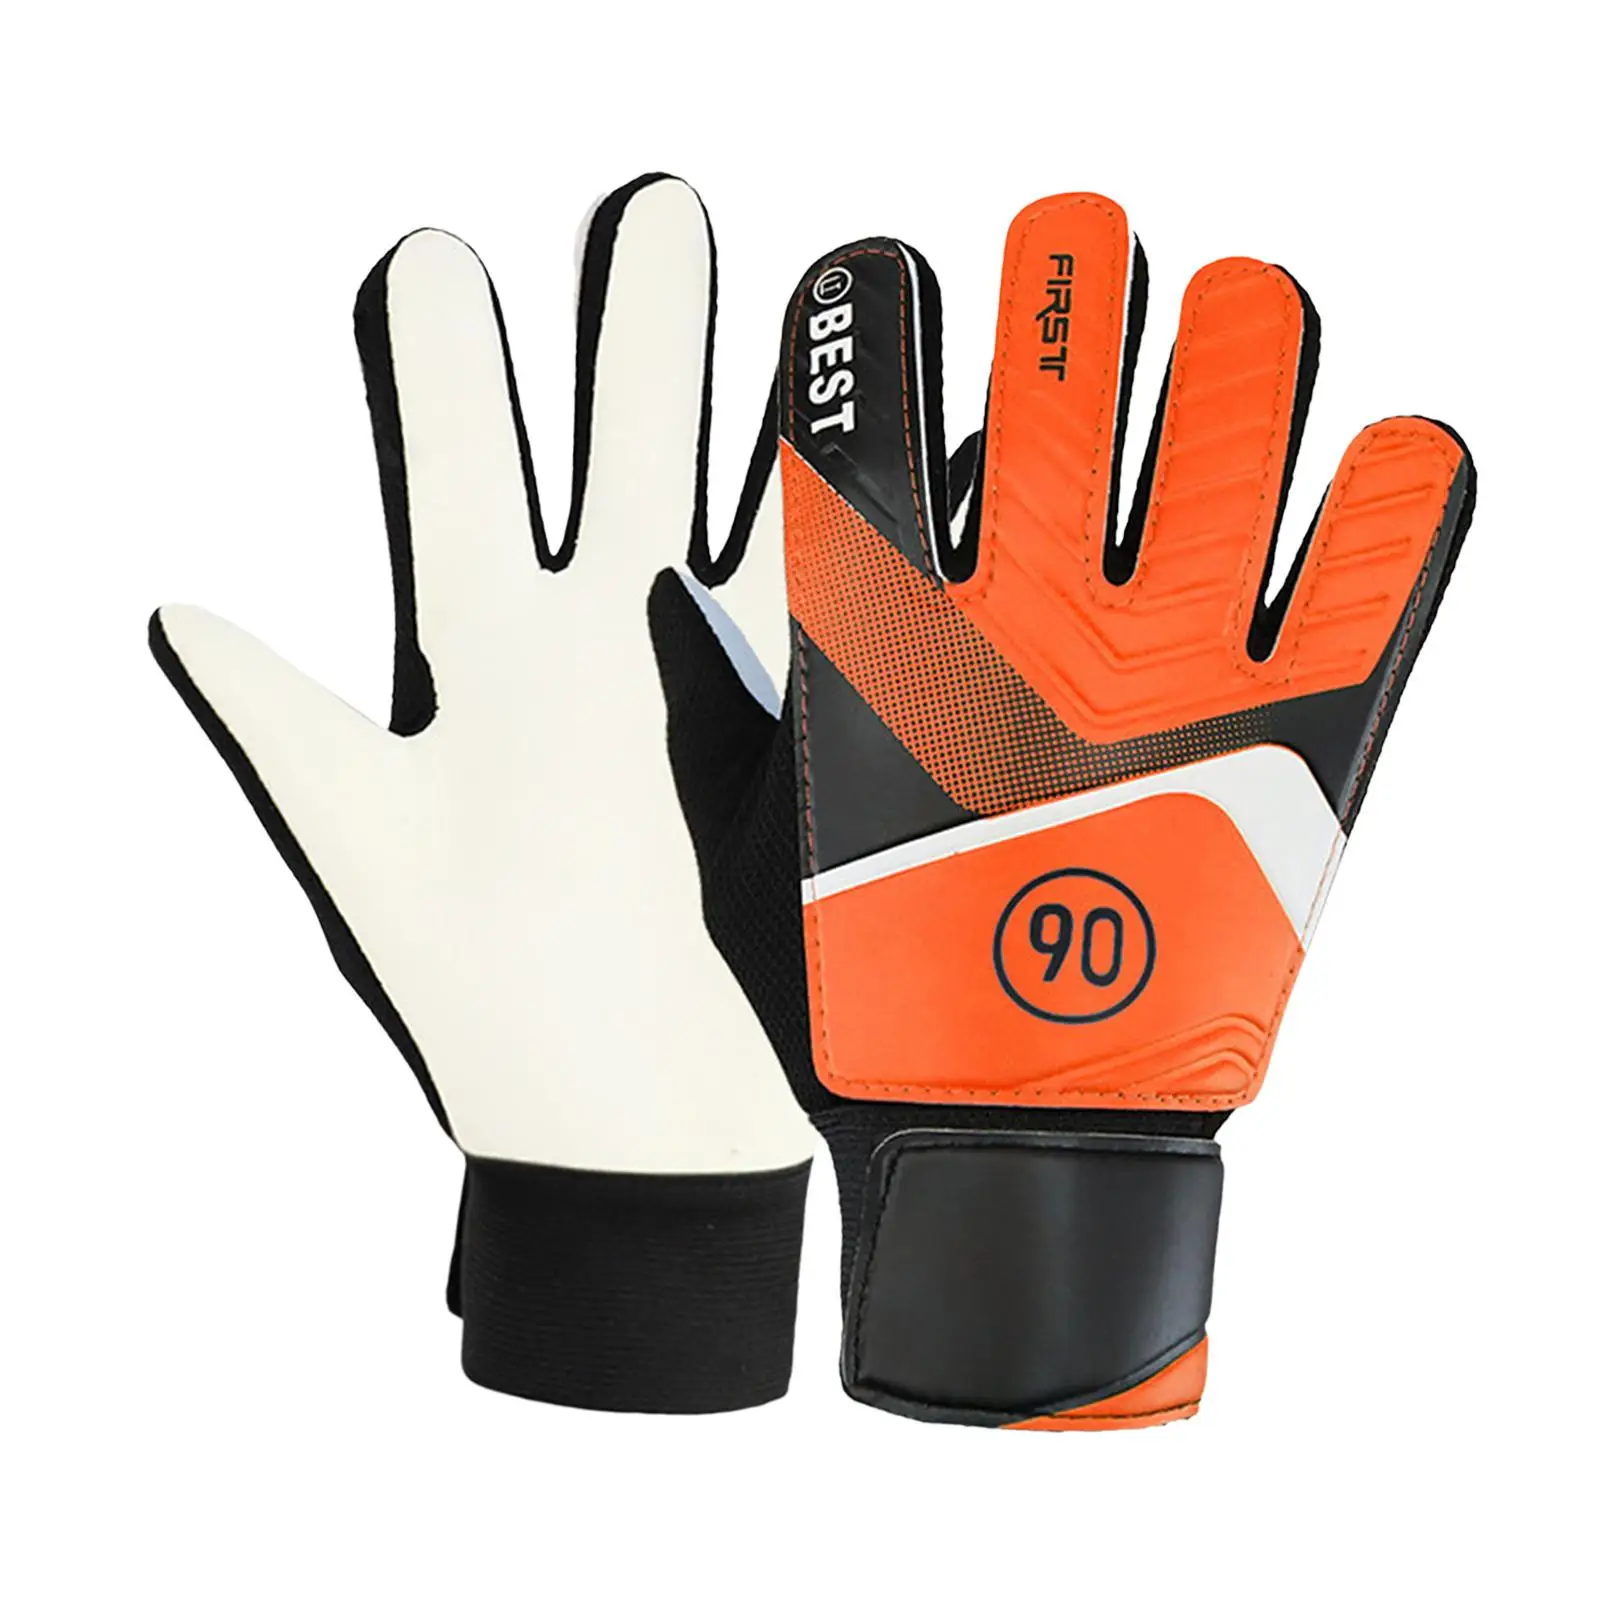 Goalkeeper Gloves Professional Match Breathable High Performance Training Finger Protection Nonslip Strong Grip for Kids